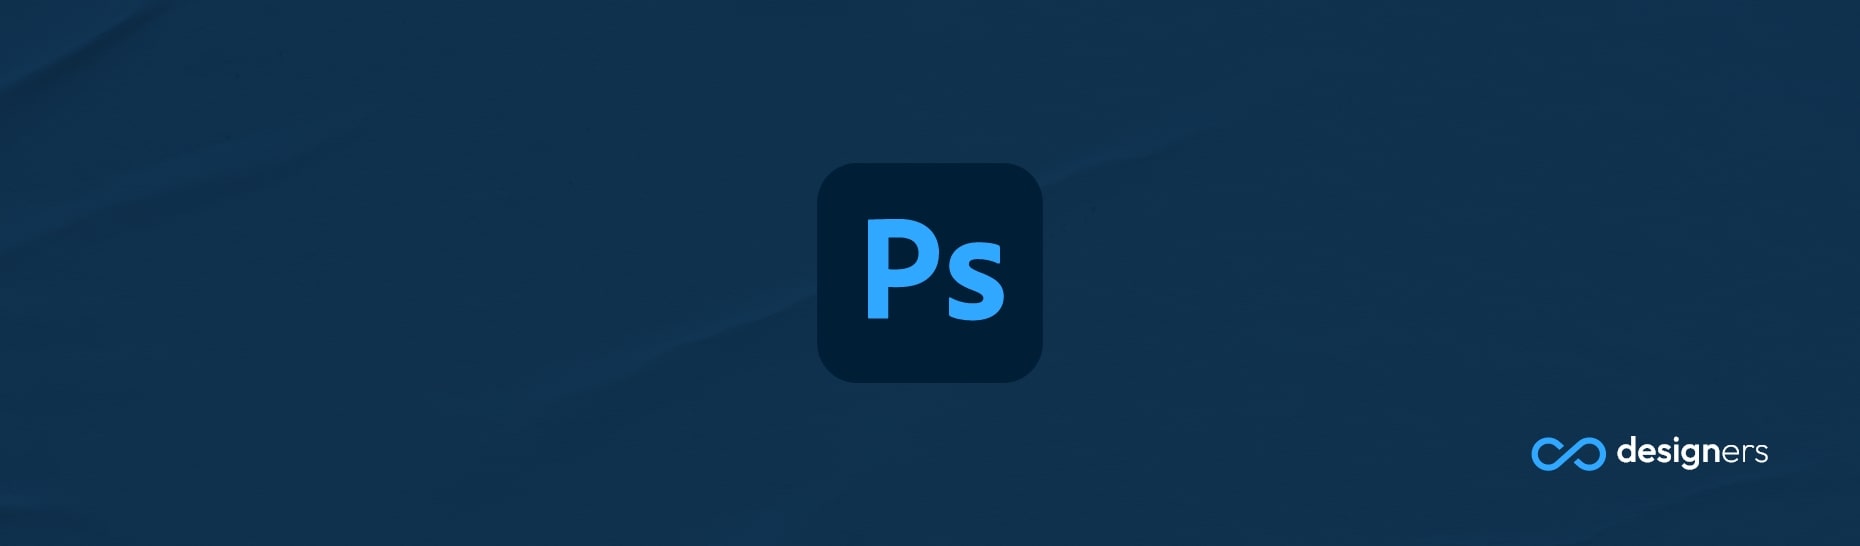 How do I convert a JPEG to a vector file in Photoshop?